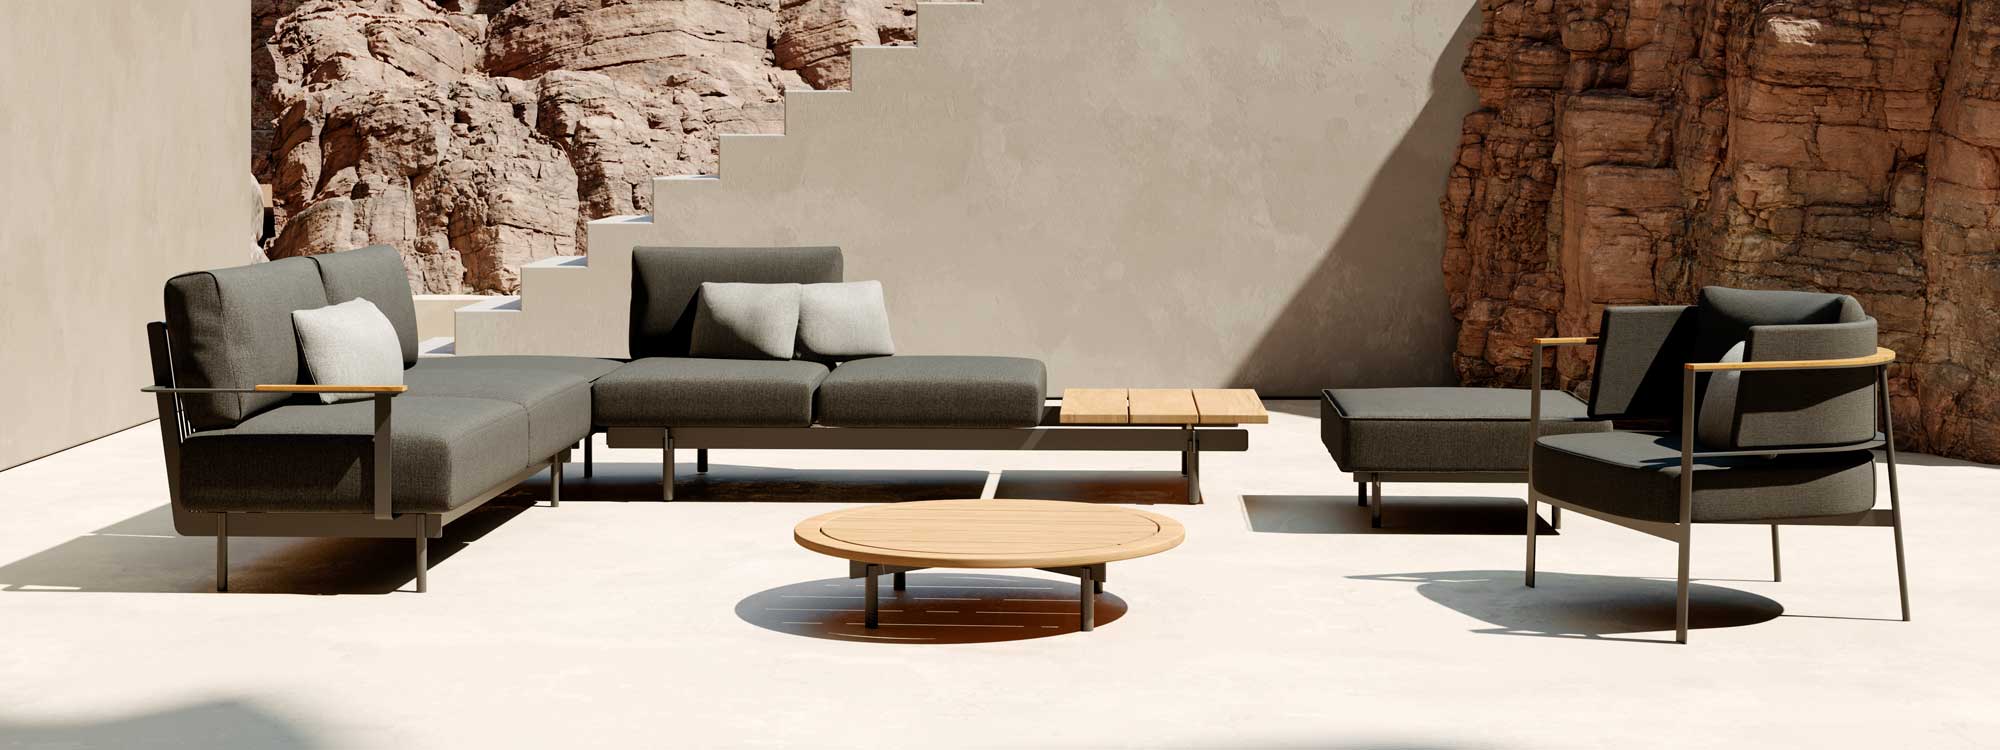 Image of modular configuration of Oiside Penda minimalist garden sofa and lounge chair, together with circular low table shown on hot terrace with rockface in the background